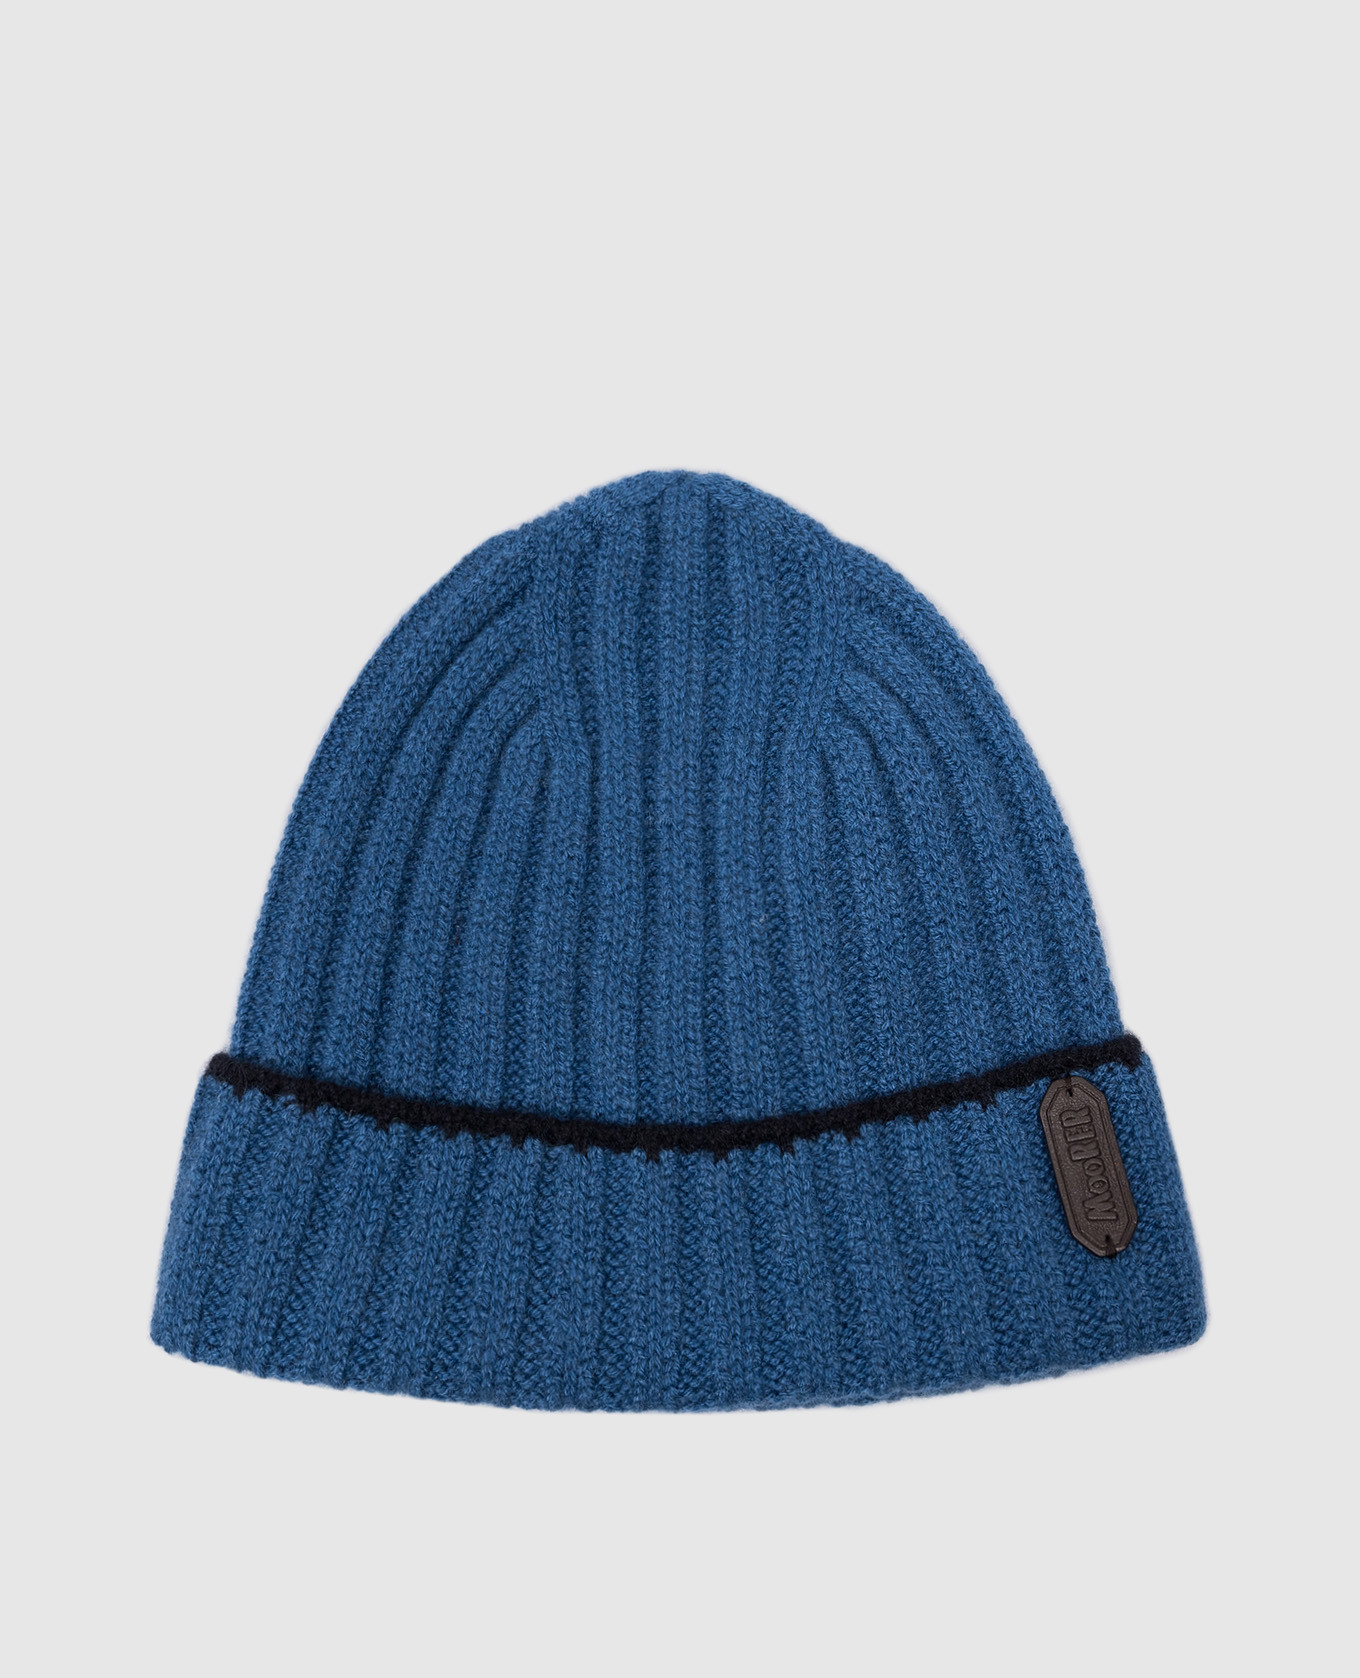 ASHER blue cashmere hat